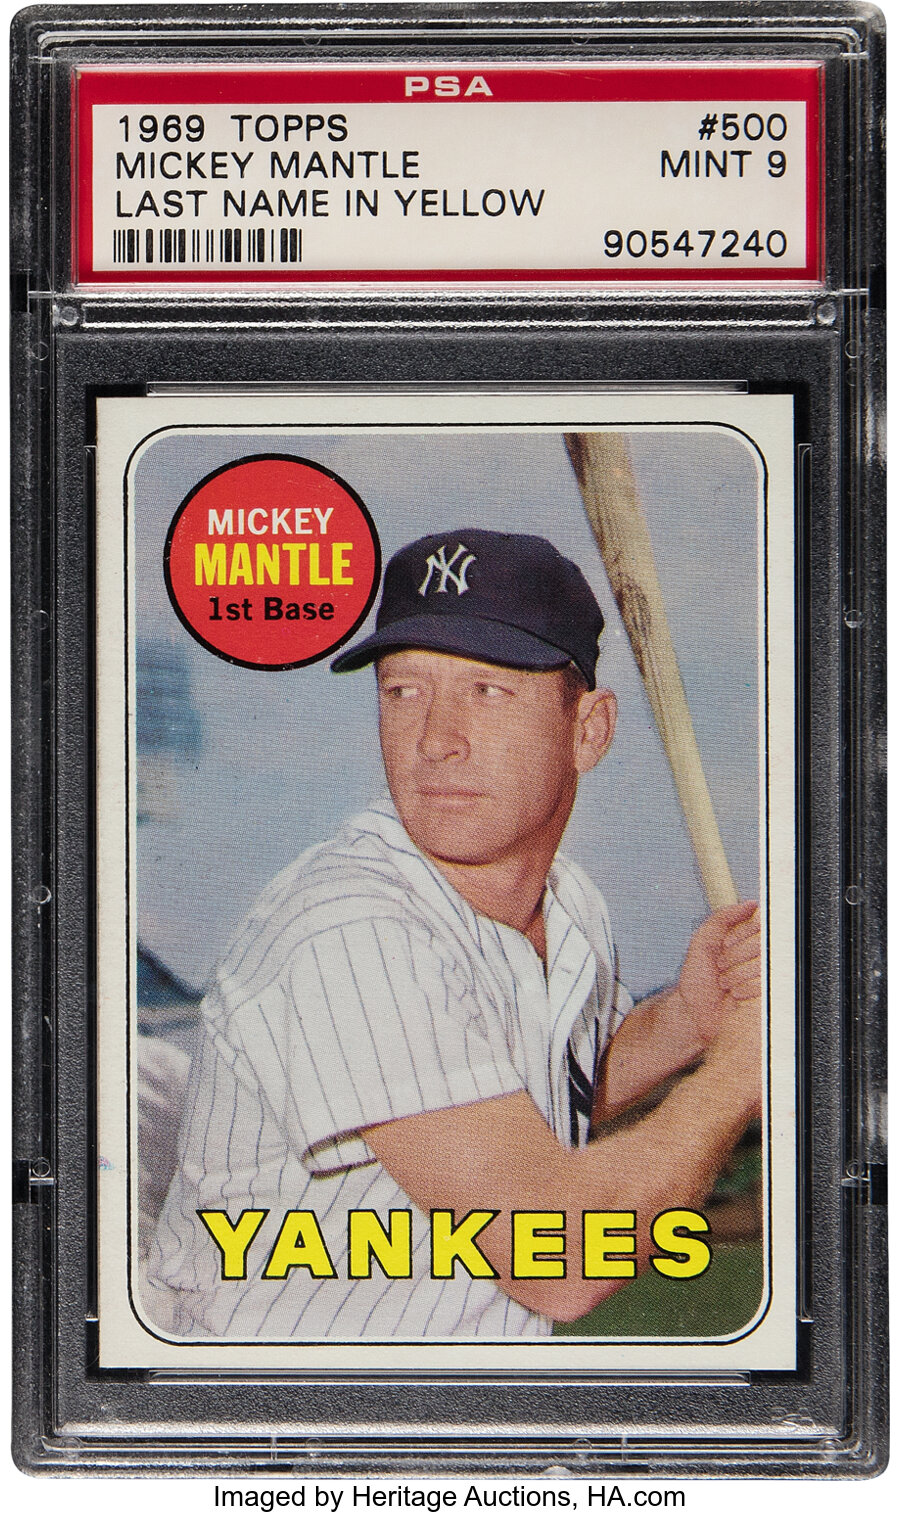 1969 Topps Mickey Mantle (Last Name In Yellow) #500 PSA Mint 9 - Two Higher